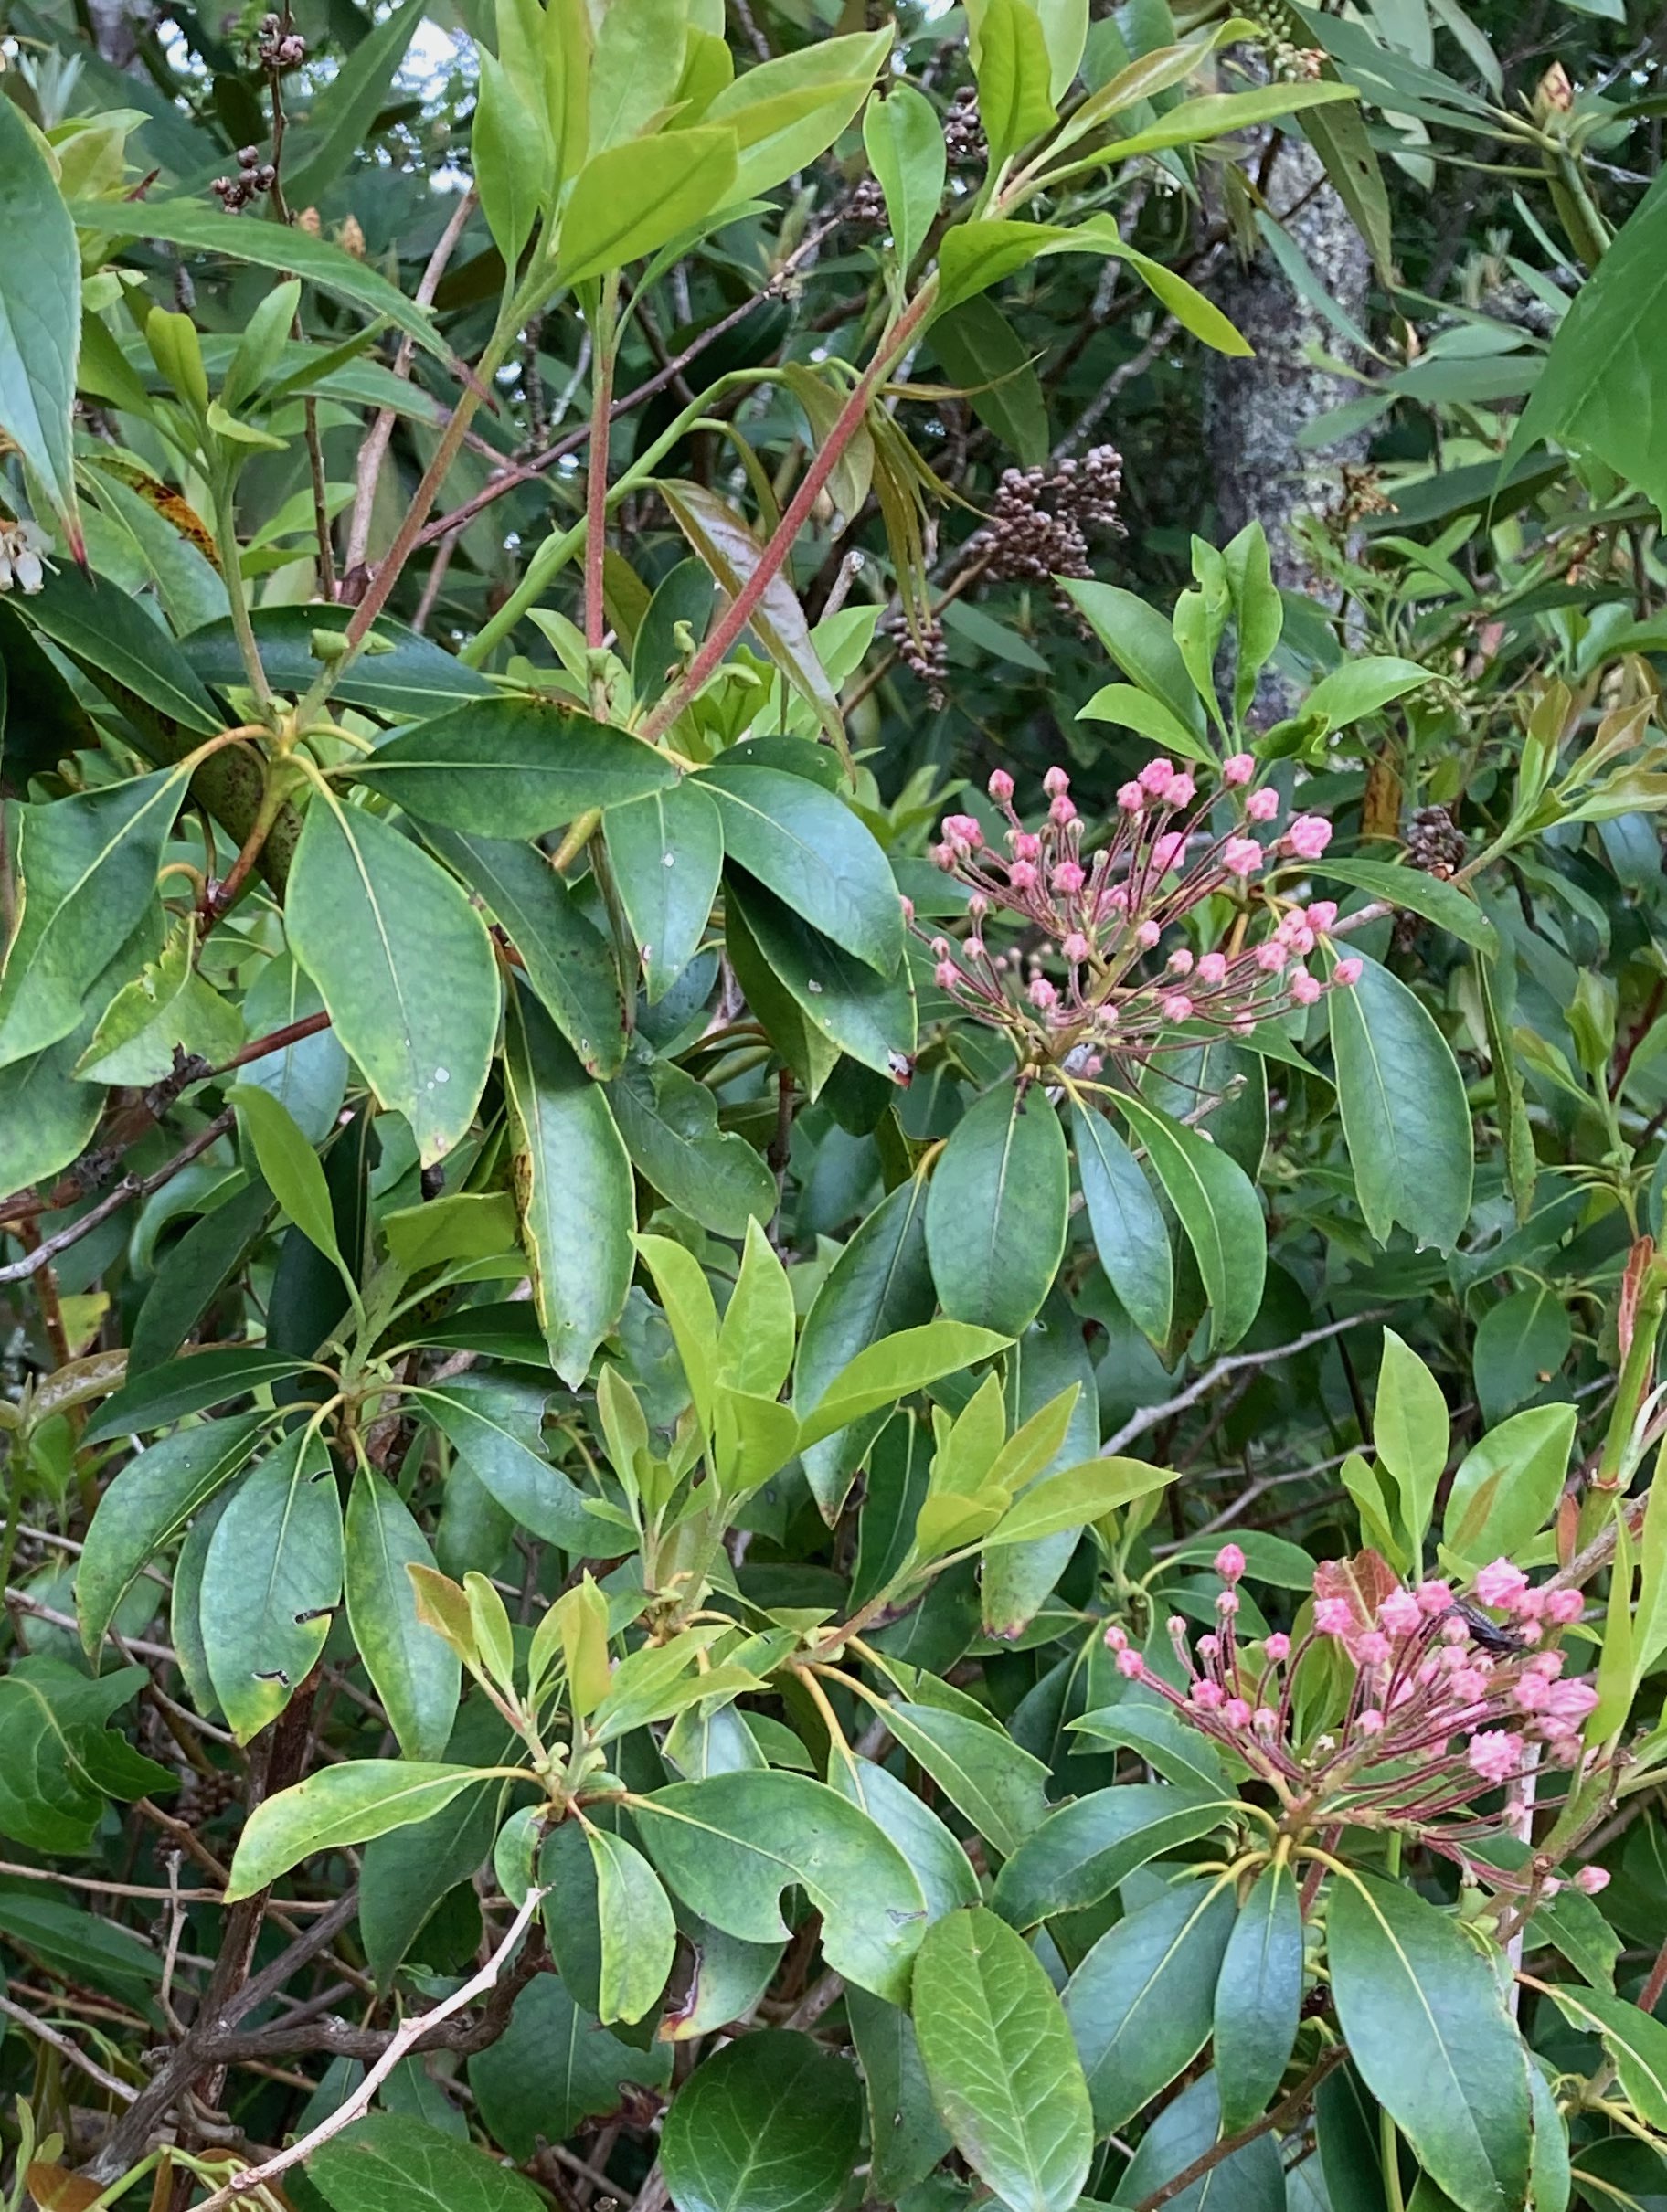 The Scientific Name is Kalmia latifolia. You will likely hear them called Mountain Laurel, Ivy, Calico-bush. This picture shows the The evergreen, elliptical-shaped leaves are dark green and glossy. of Kalmia latifolia